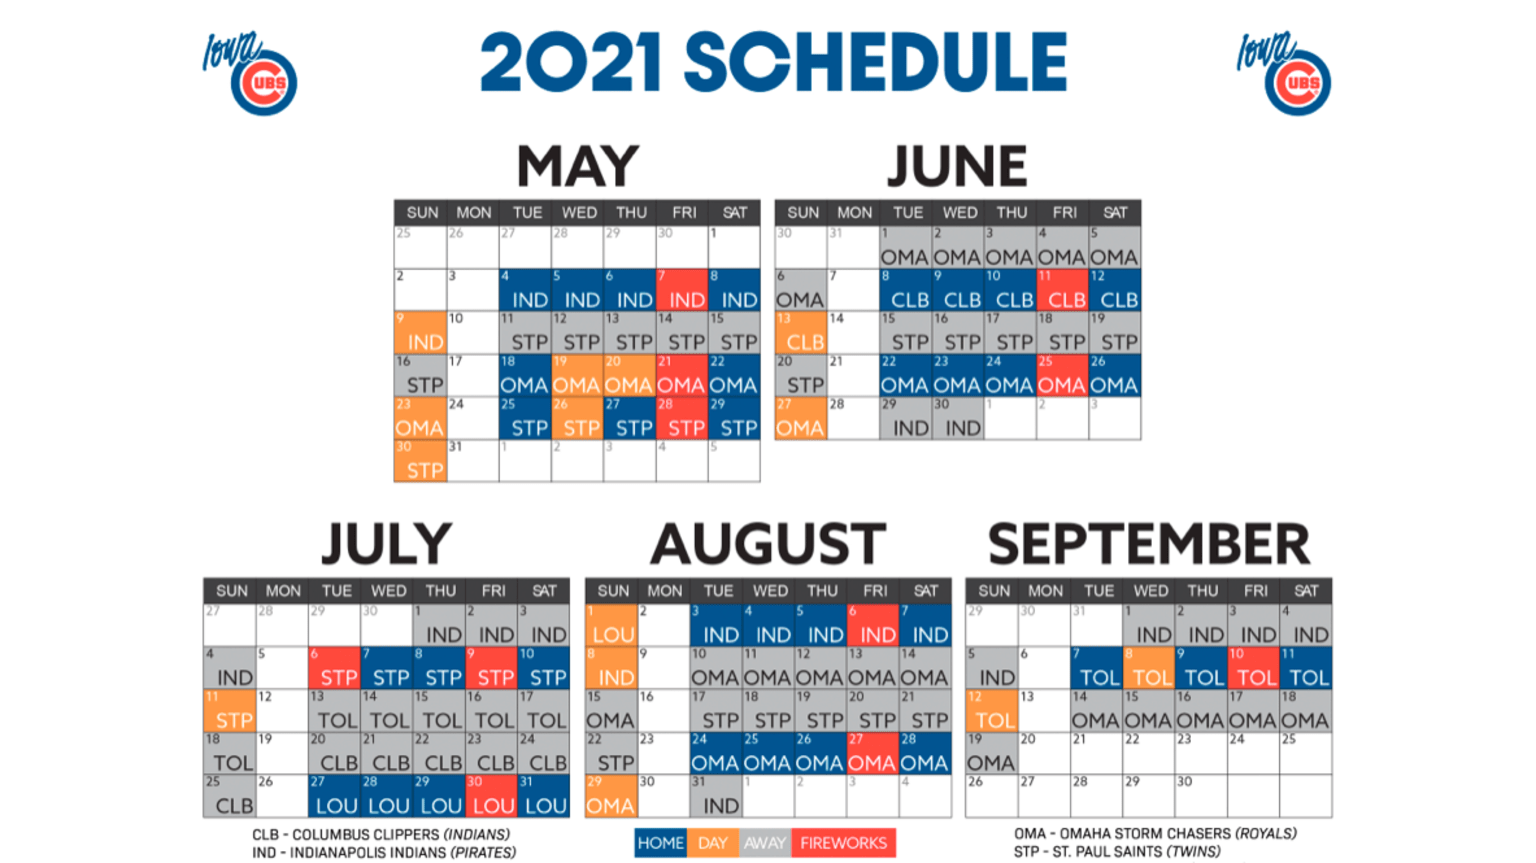 Iowa Cubs Officially Announce Updated Schedule, Now Kicking Off in May